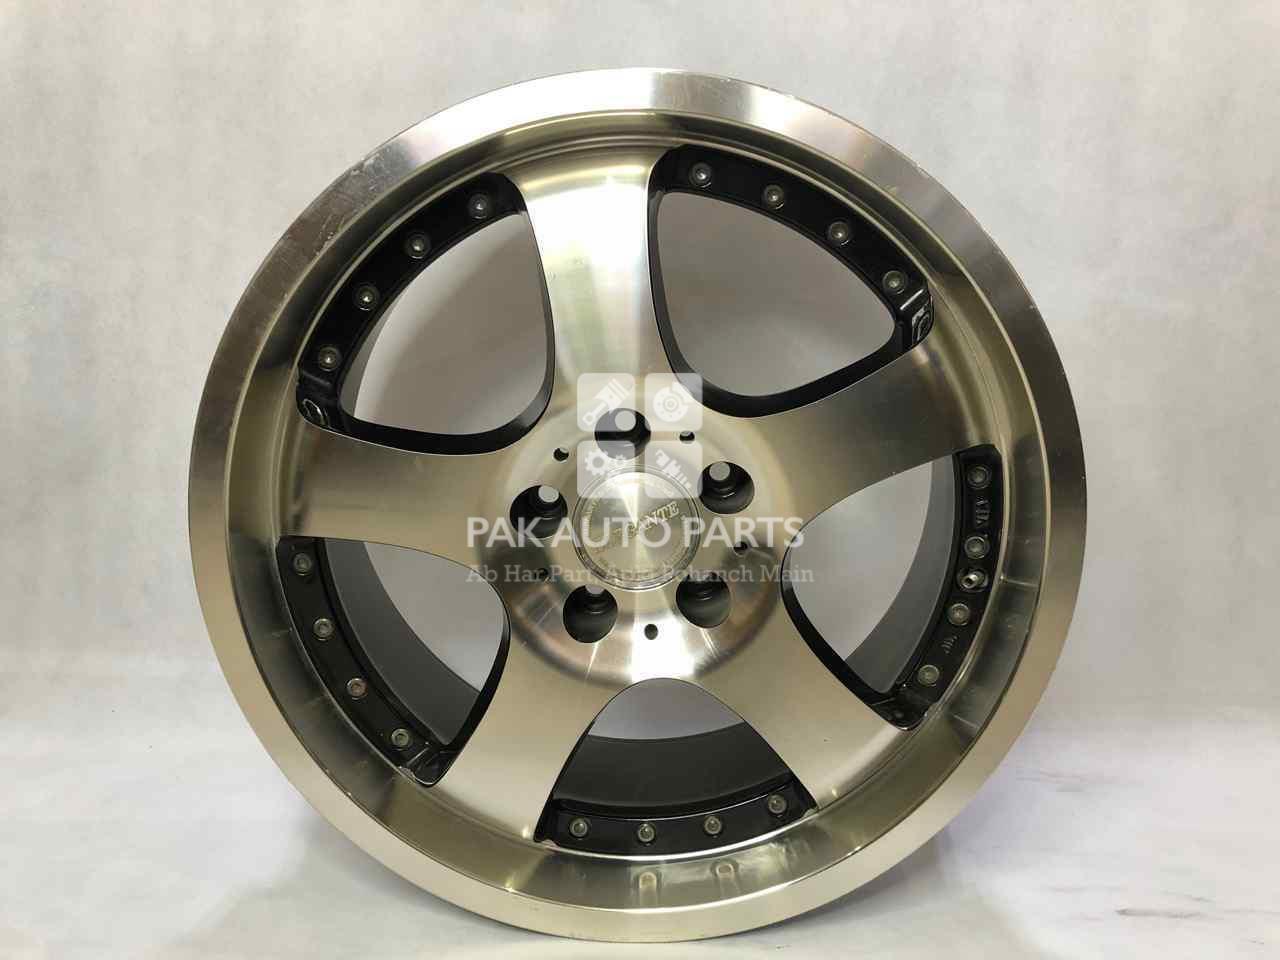 Picture of 18 Inch Alloy Rim